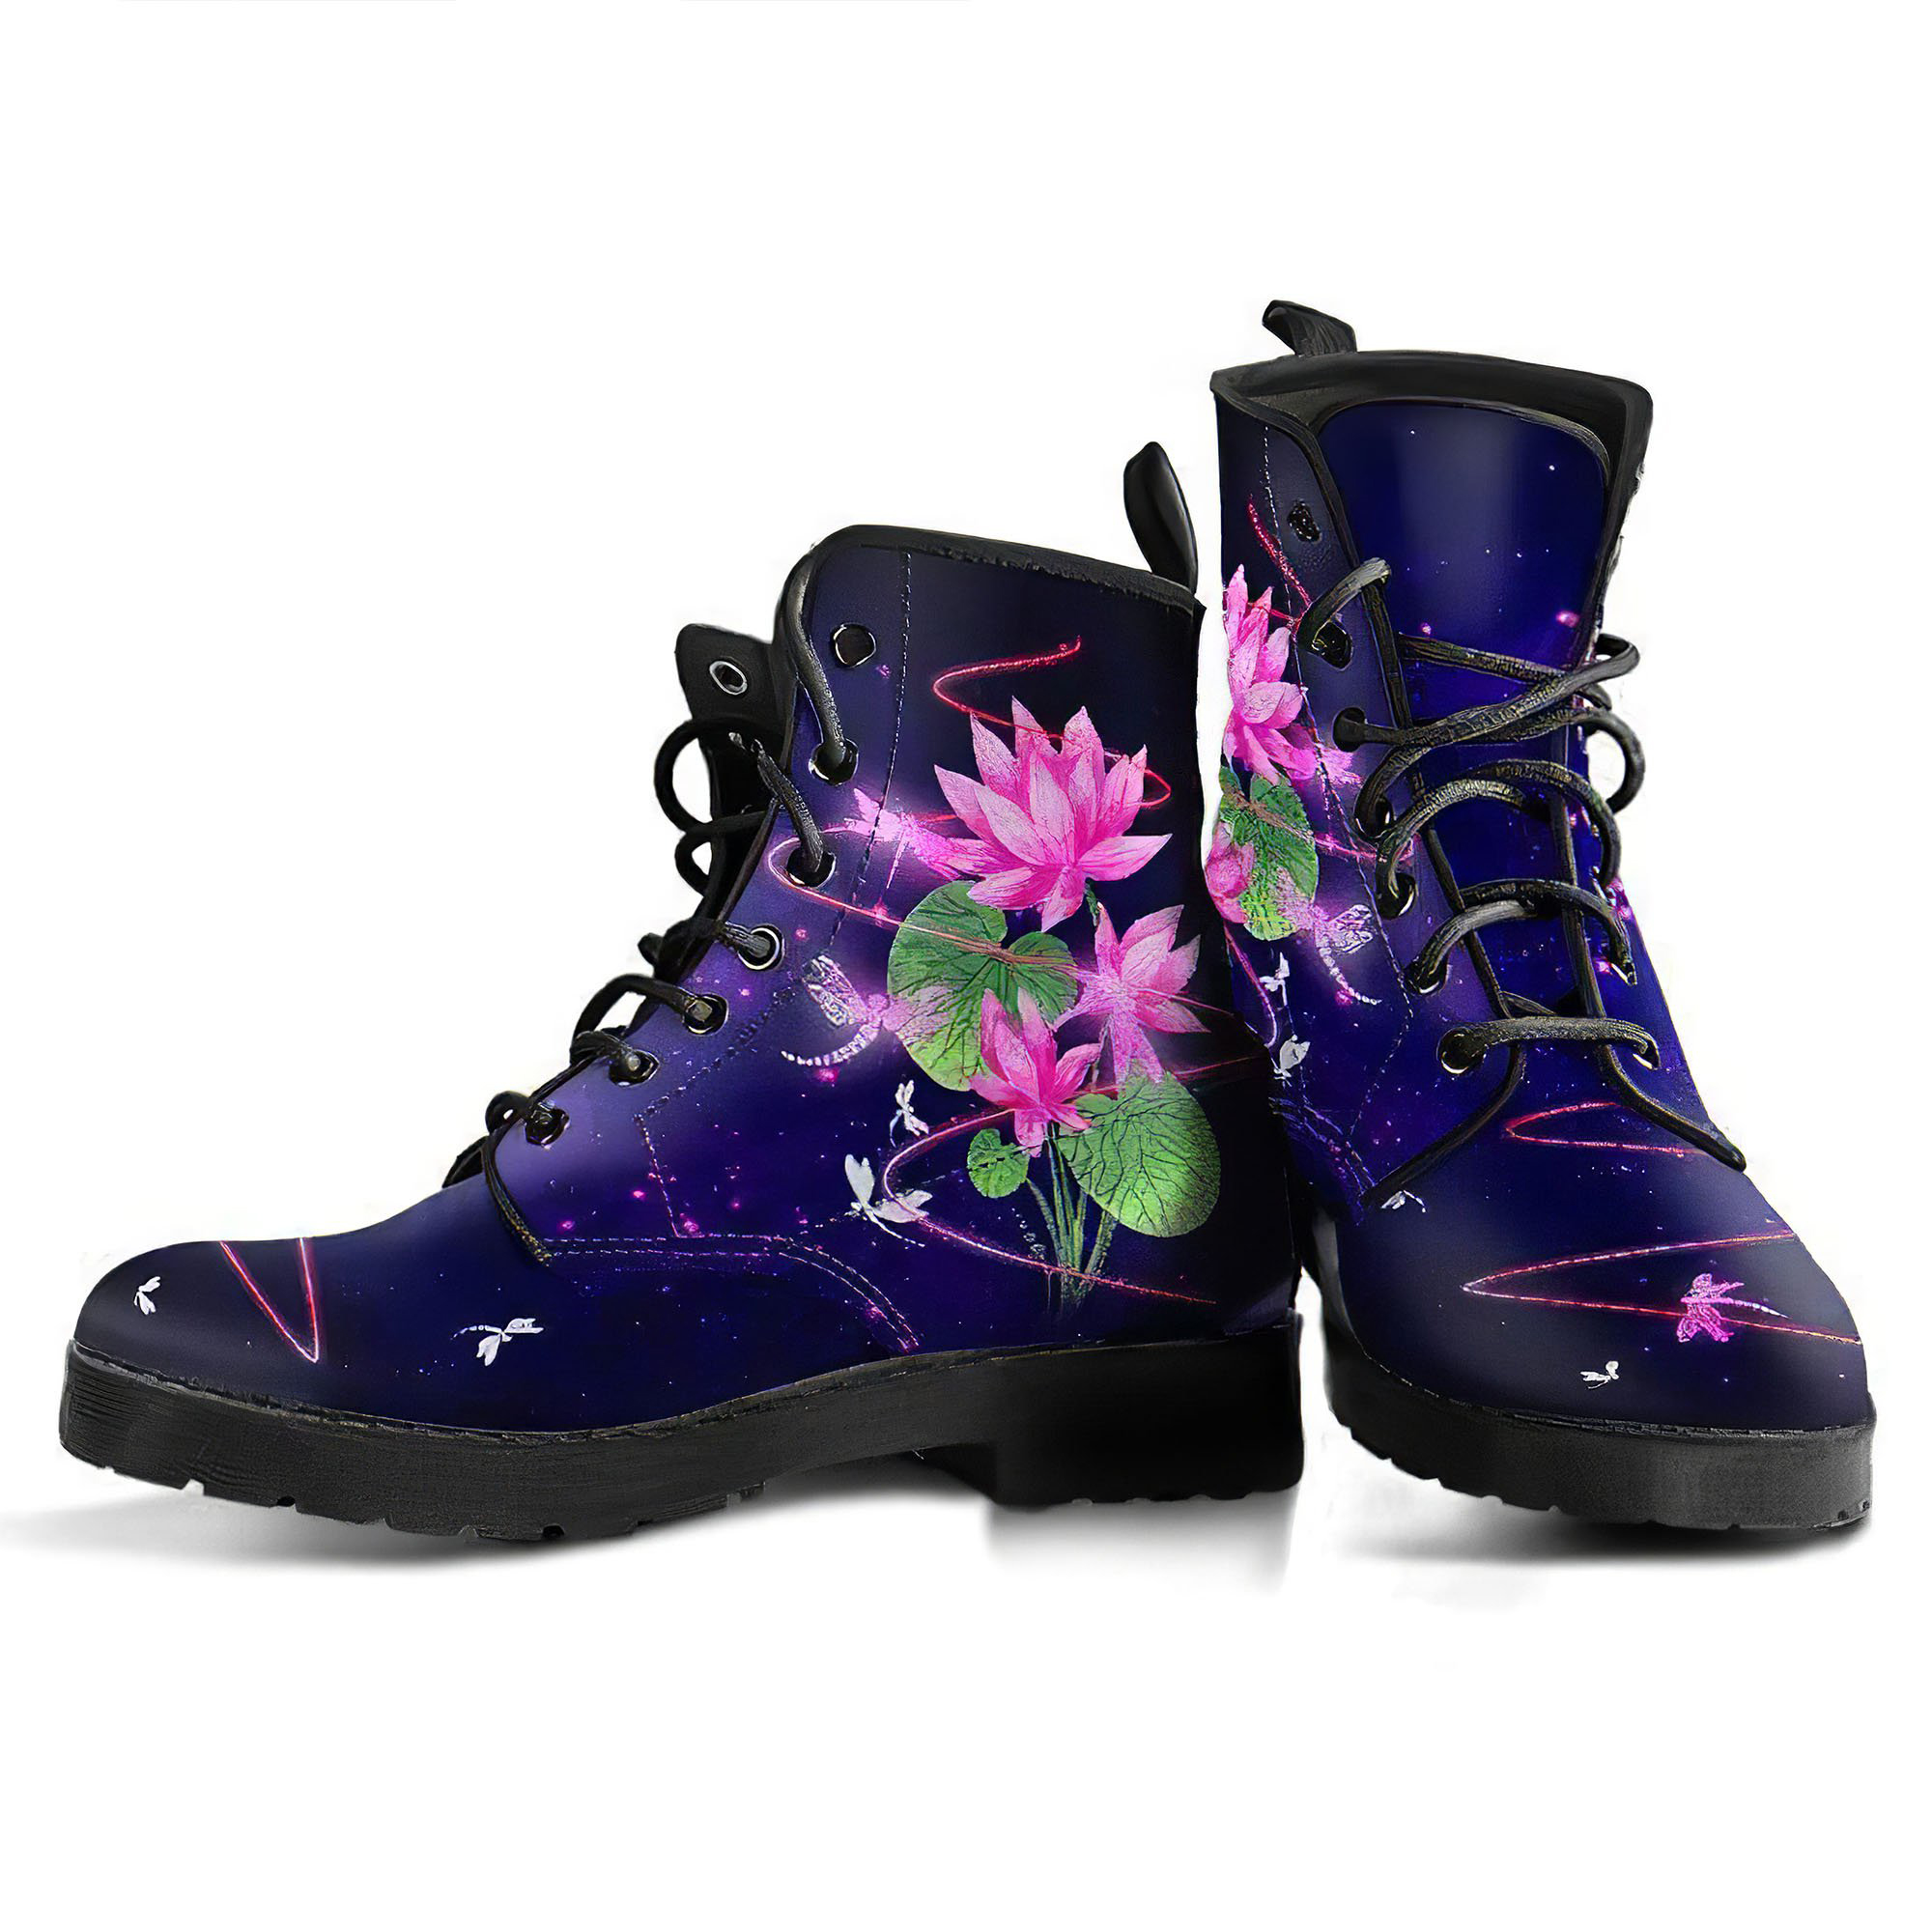 dragonfly-with-lotus-flower-handcrafted-boots-v9-gp-main.jpg